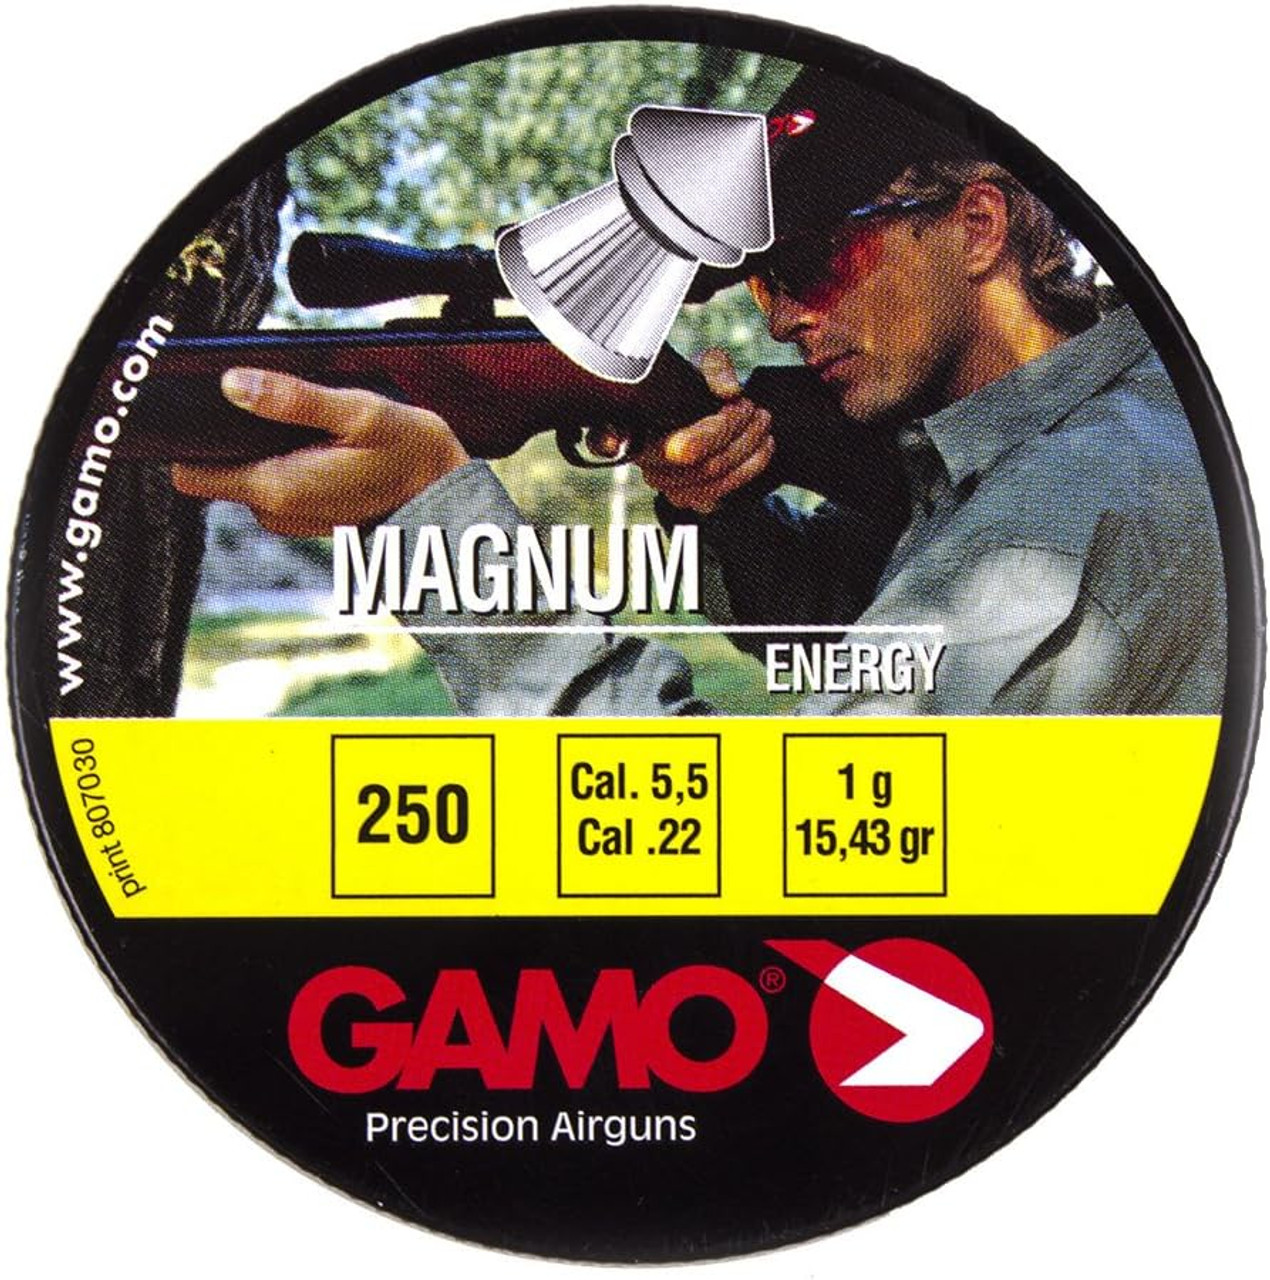 GAMO MAGNUM SPIRE POINT DBL RING .22 CAL. TINS OF 250 6320225BL54